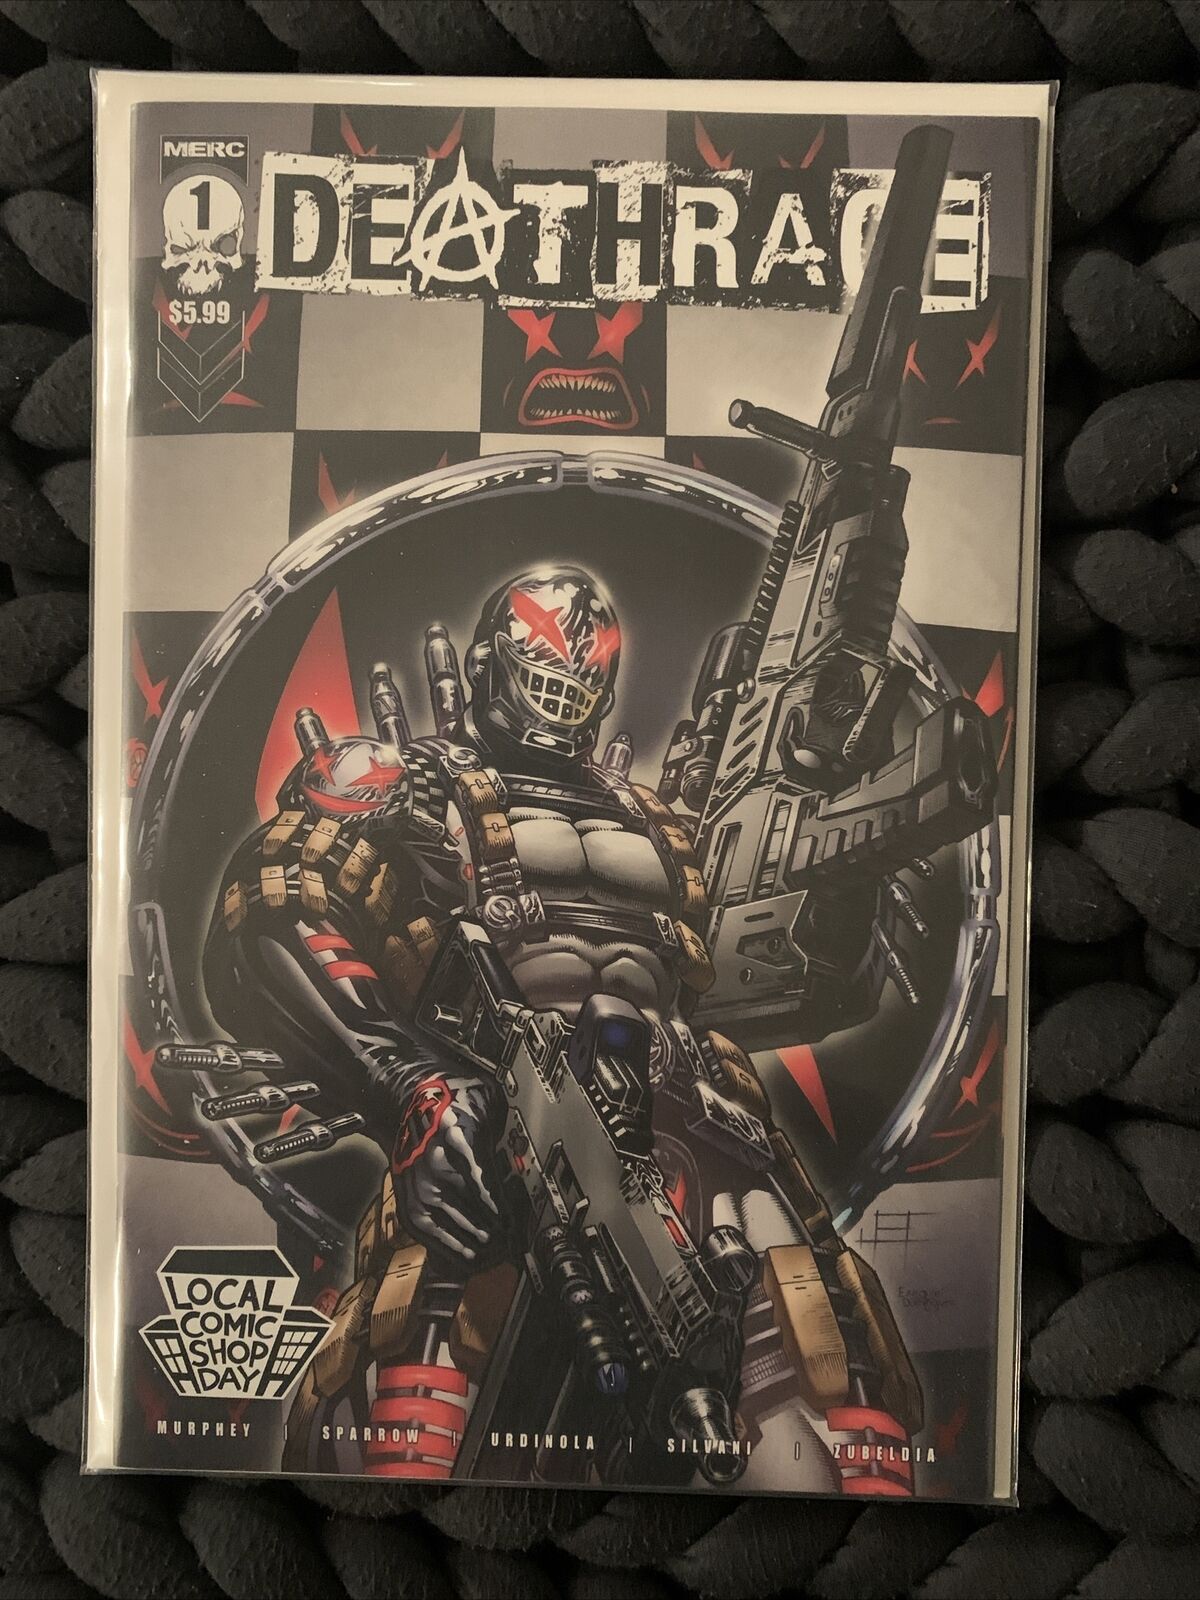 Deathrage #1 (of 6) Local Comic Shop Day Variant Cover F by Jeffrey Edwards 2022